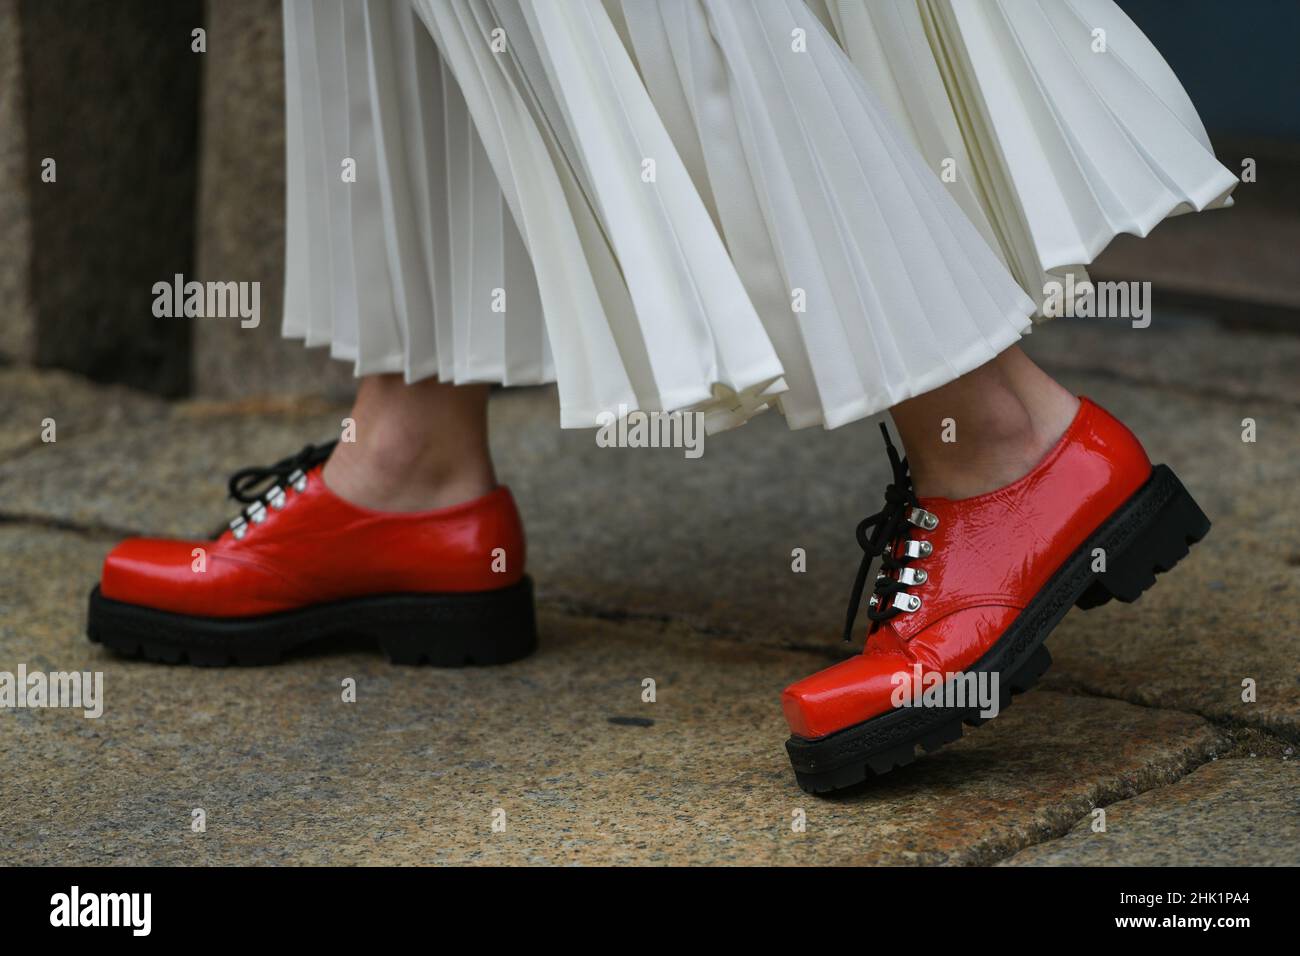 Street style outfit - woman wearing long white dress and red shoes Stock Photo